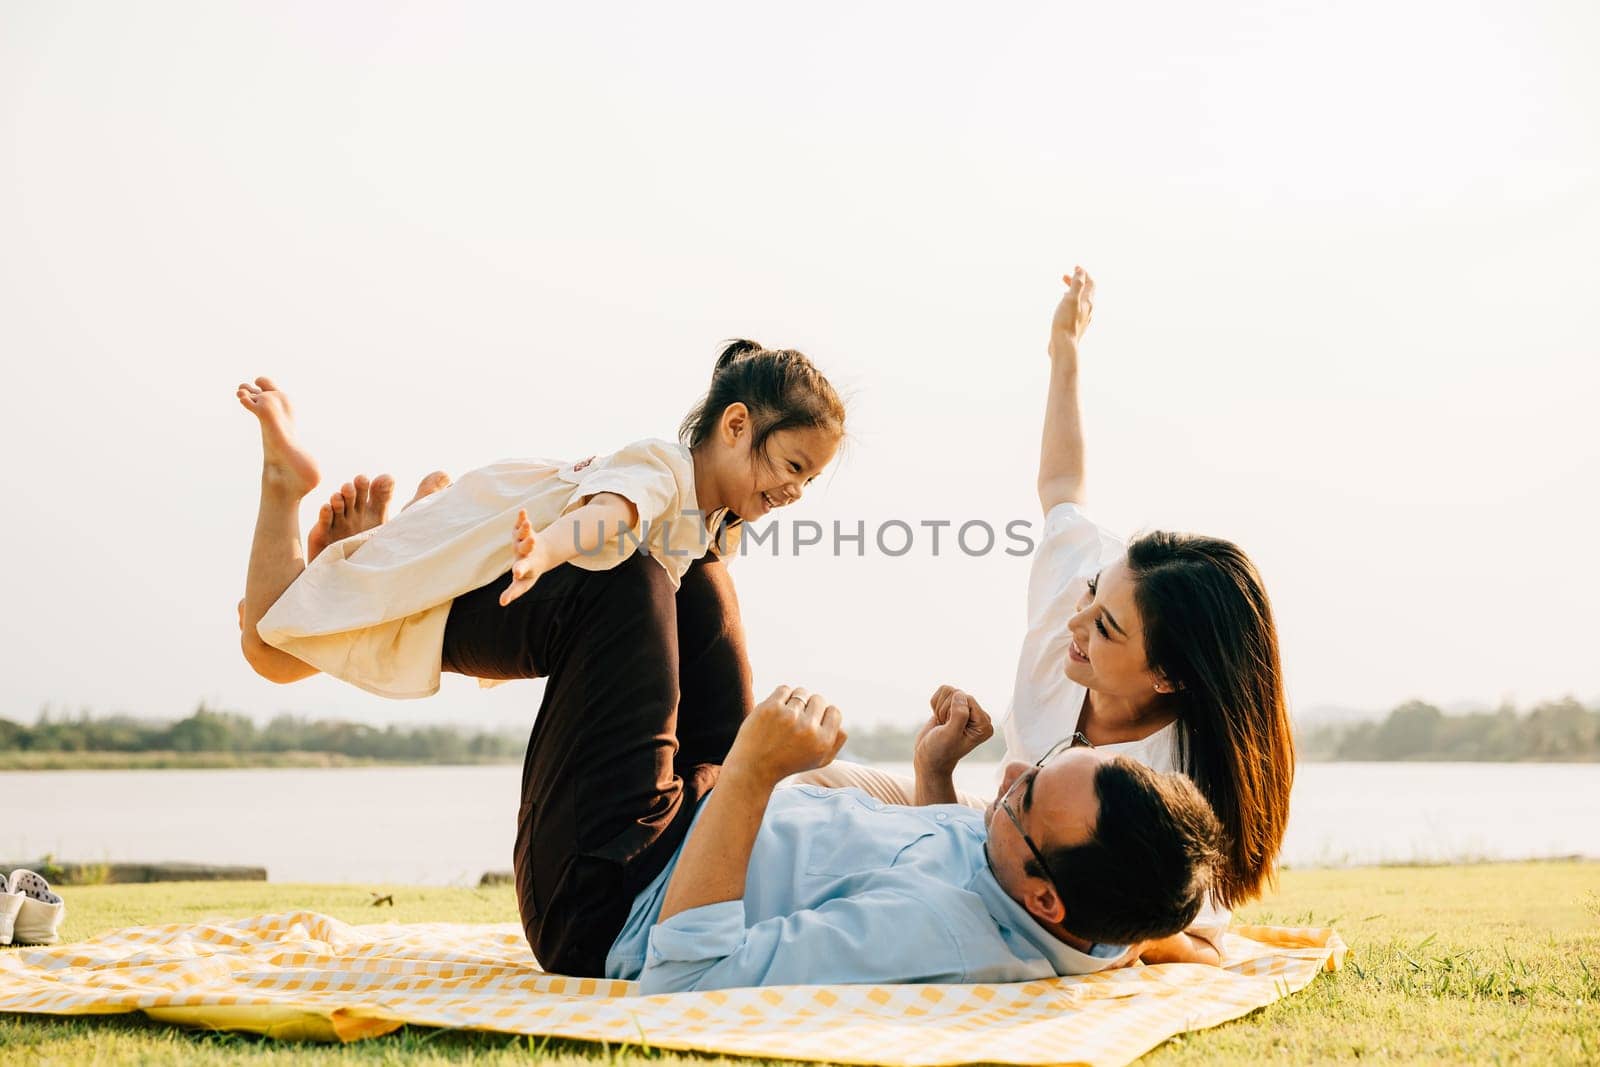 A family enjoys playful moments together. Father holds daughter high in air as she giggles and spreads her arms like wings, while mother watches with a smile outdoor. a precious moment of family fun